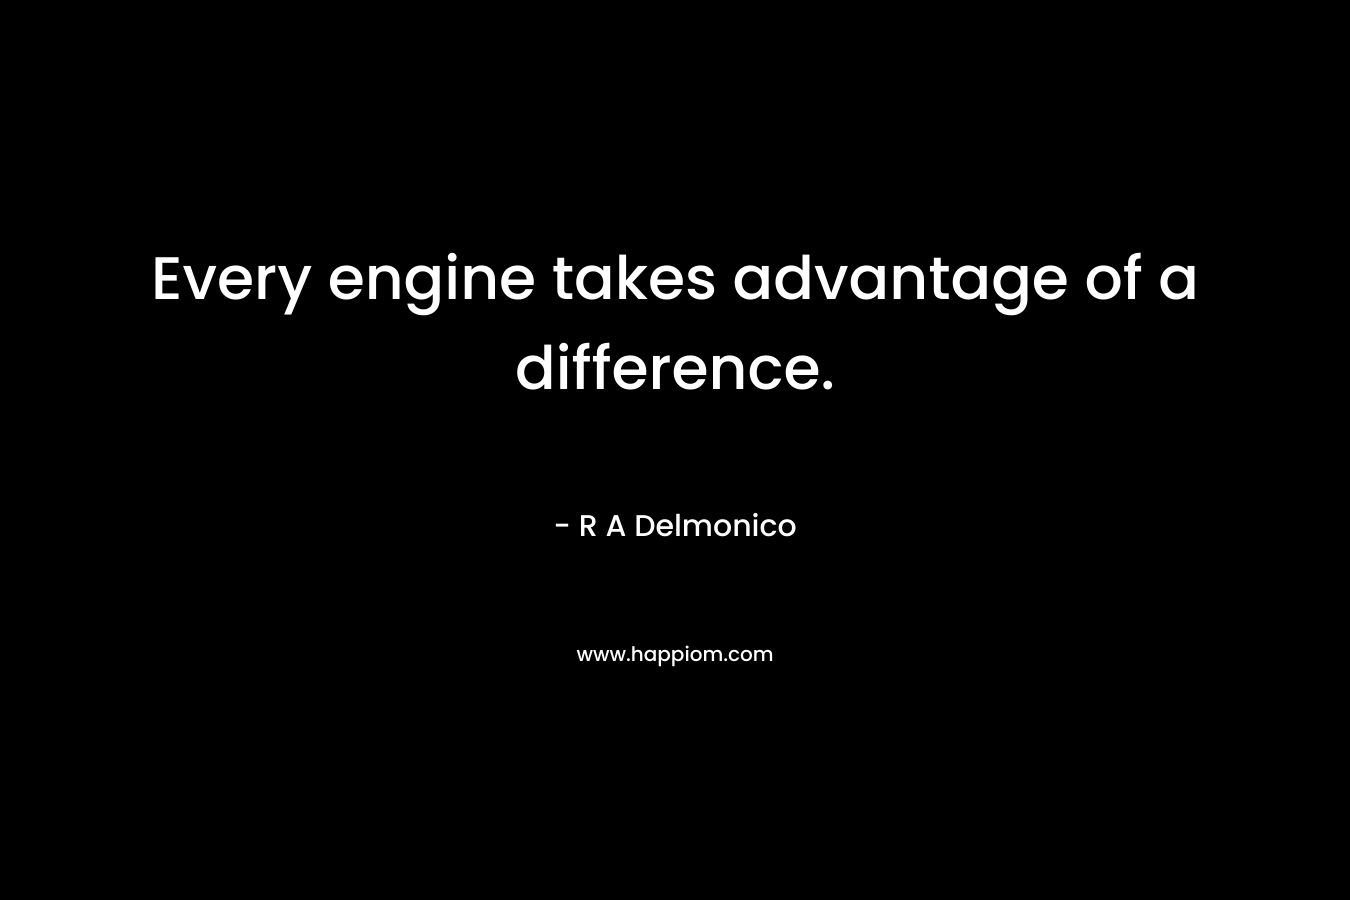 Every engine takes advantage of a difference.